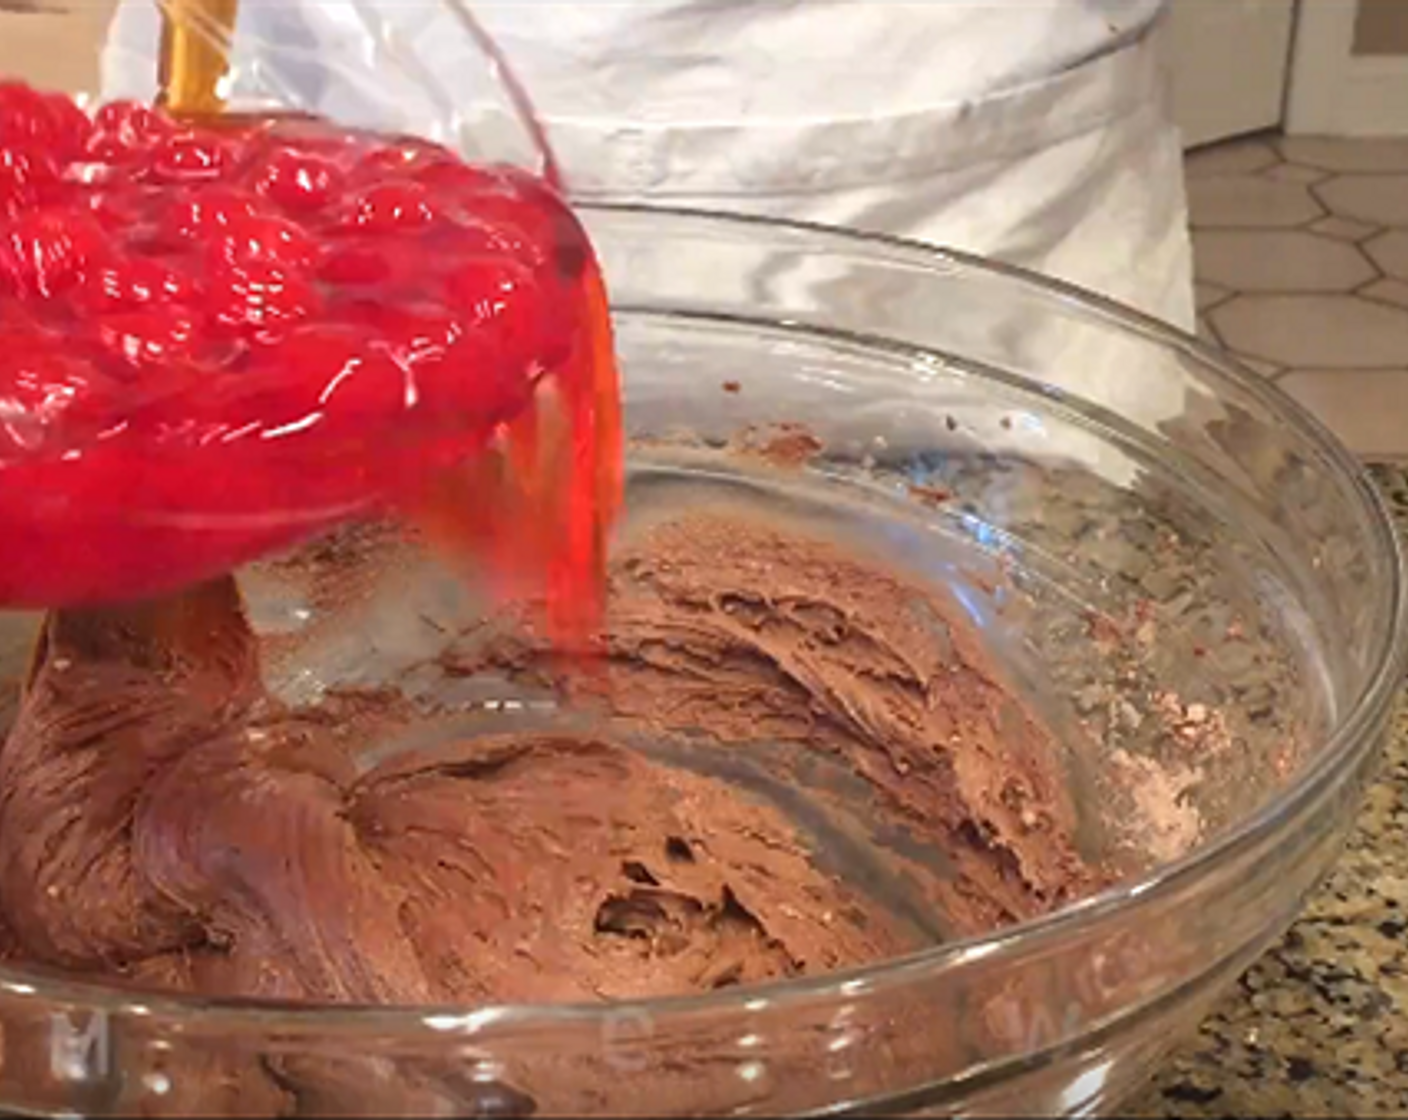 step 2 In a mixing bowl, mix Devil's Food Cake Mix (1 pckg), Eggs (2), Vegetable Oil (1/4 cup), Milk (1/4 cup), and Almond Extract (1 tsp) until well blended. Mix in Maraschino Cherries (2 1/4 cups) and its juices.